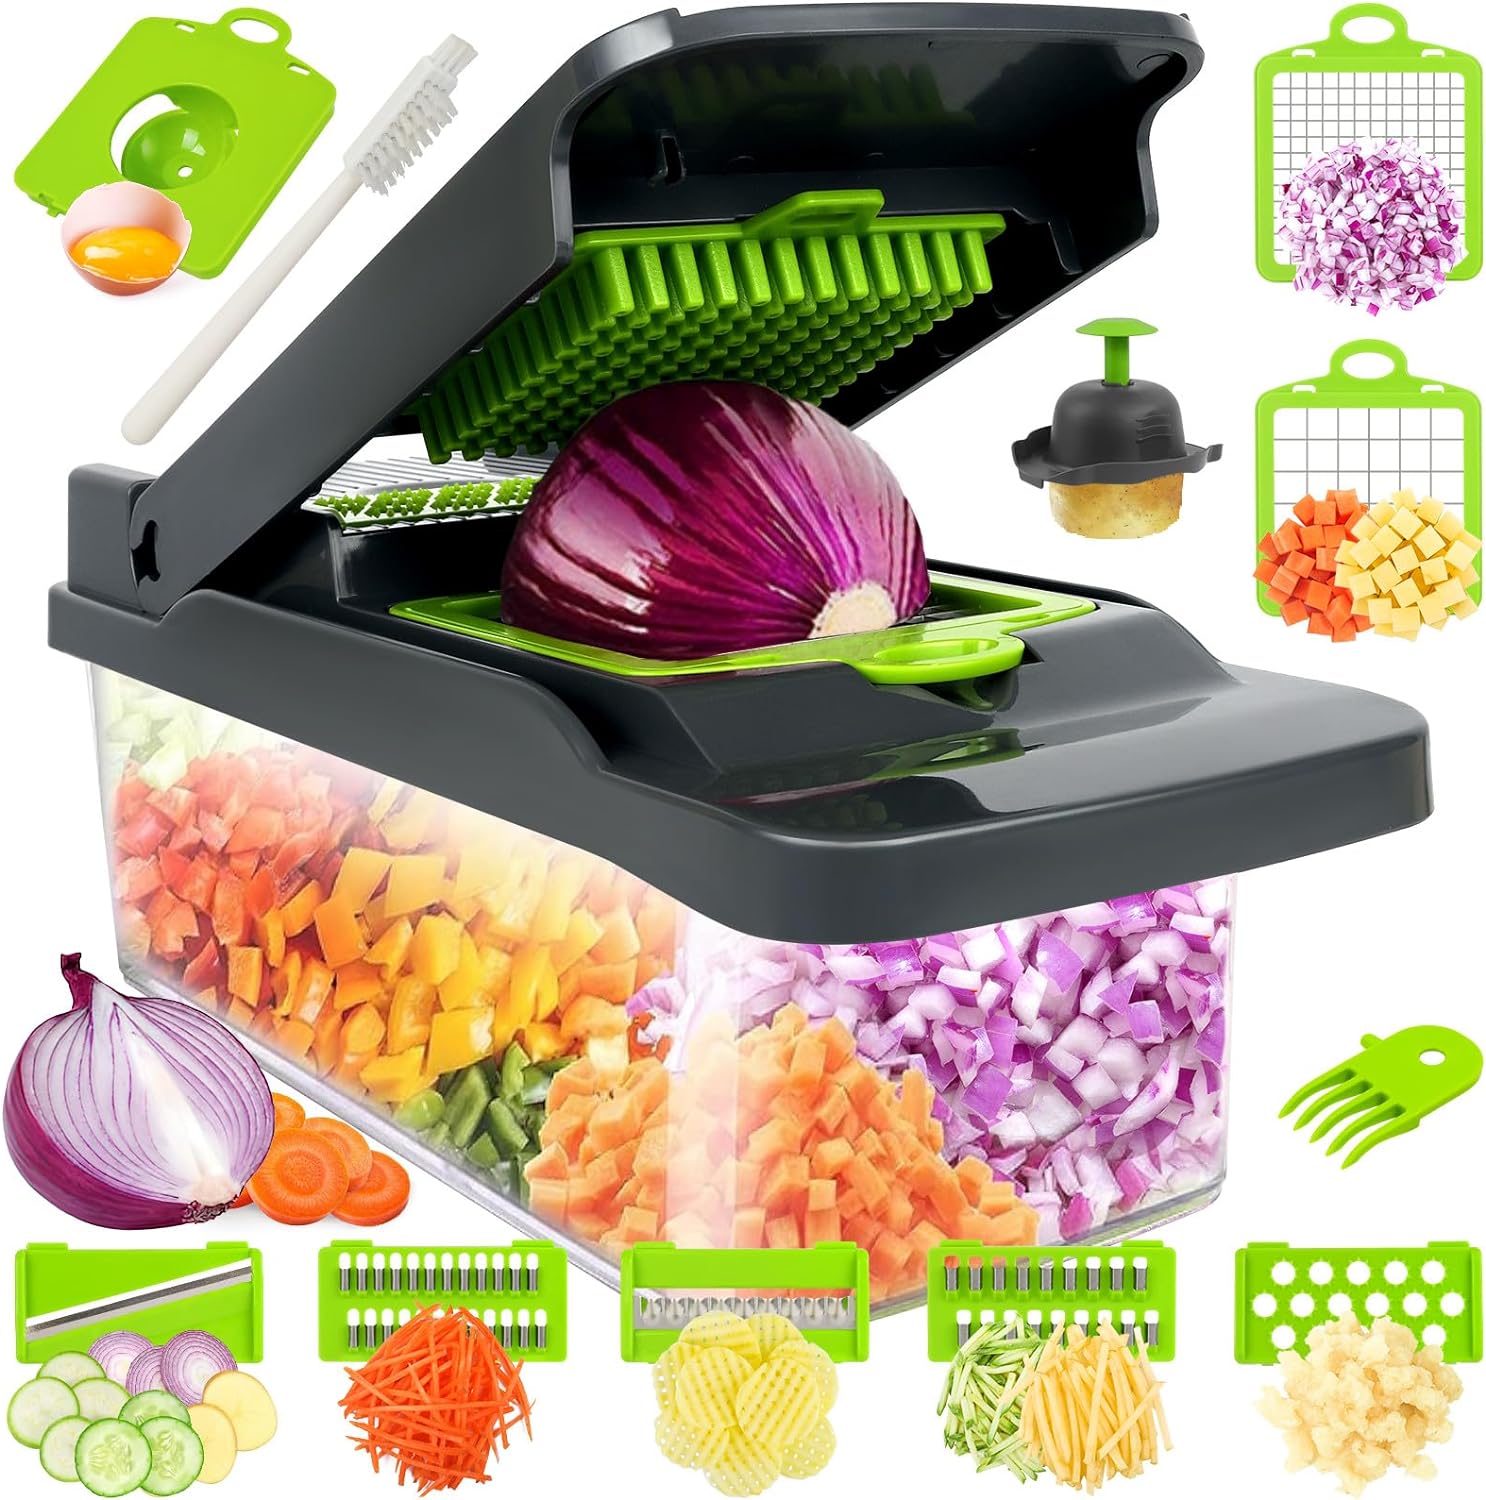 Grab Yours Now! Vegetable Chopper - Pro 12 in 1 Multifunctional Onion/Veggie Chopper With Container